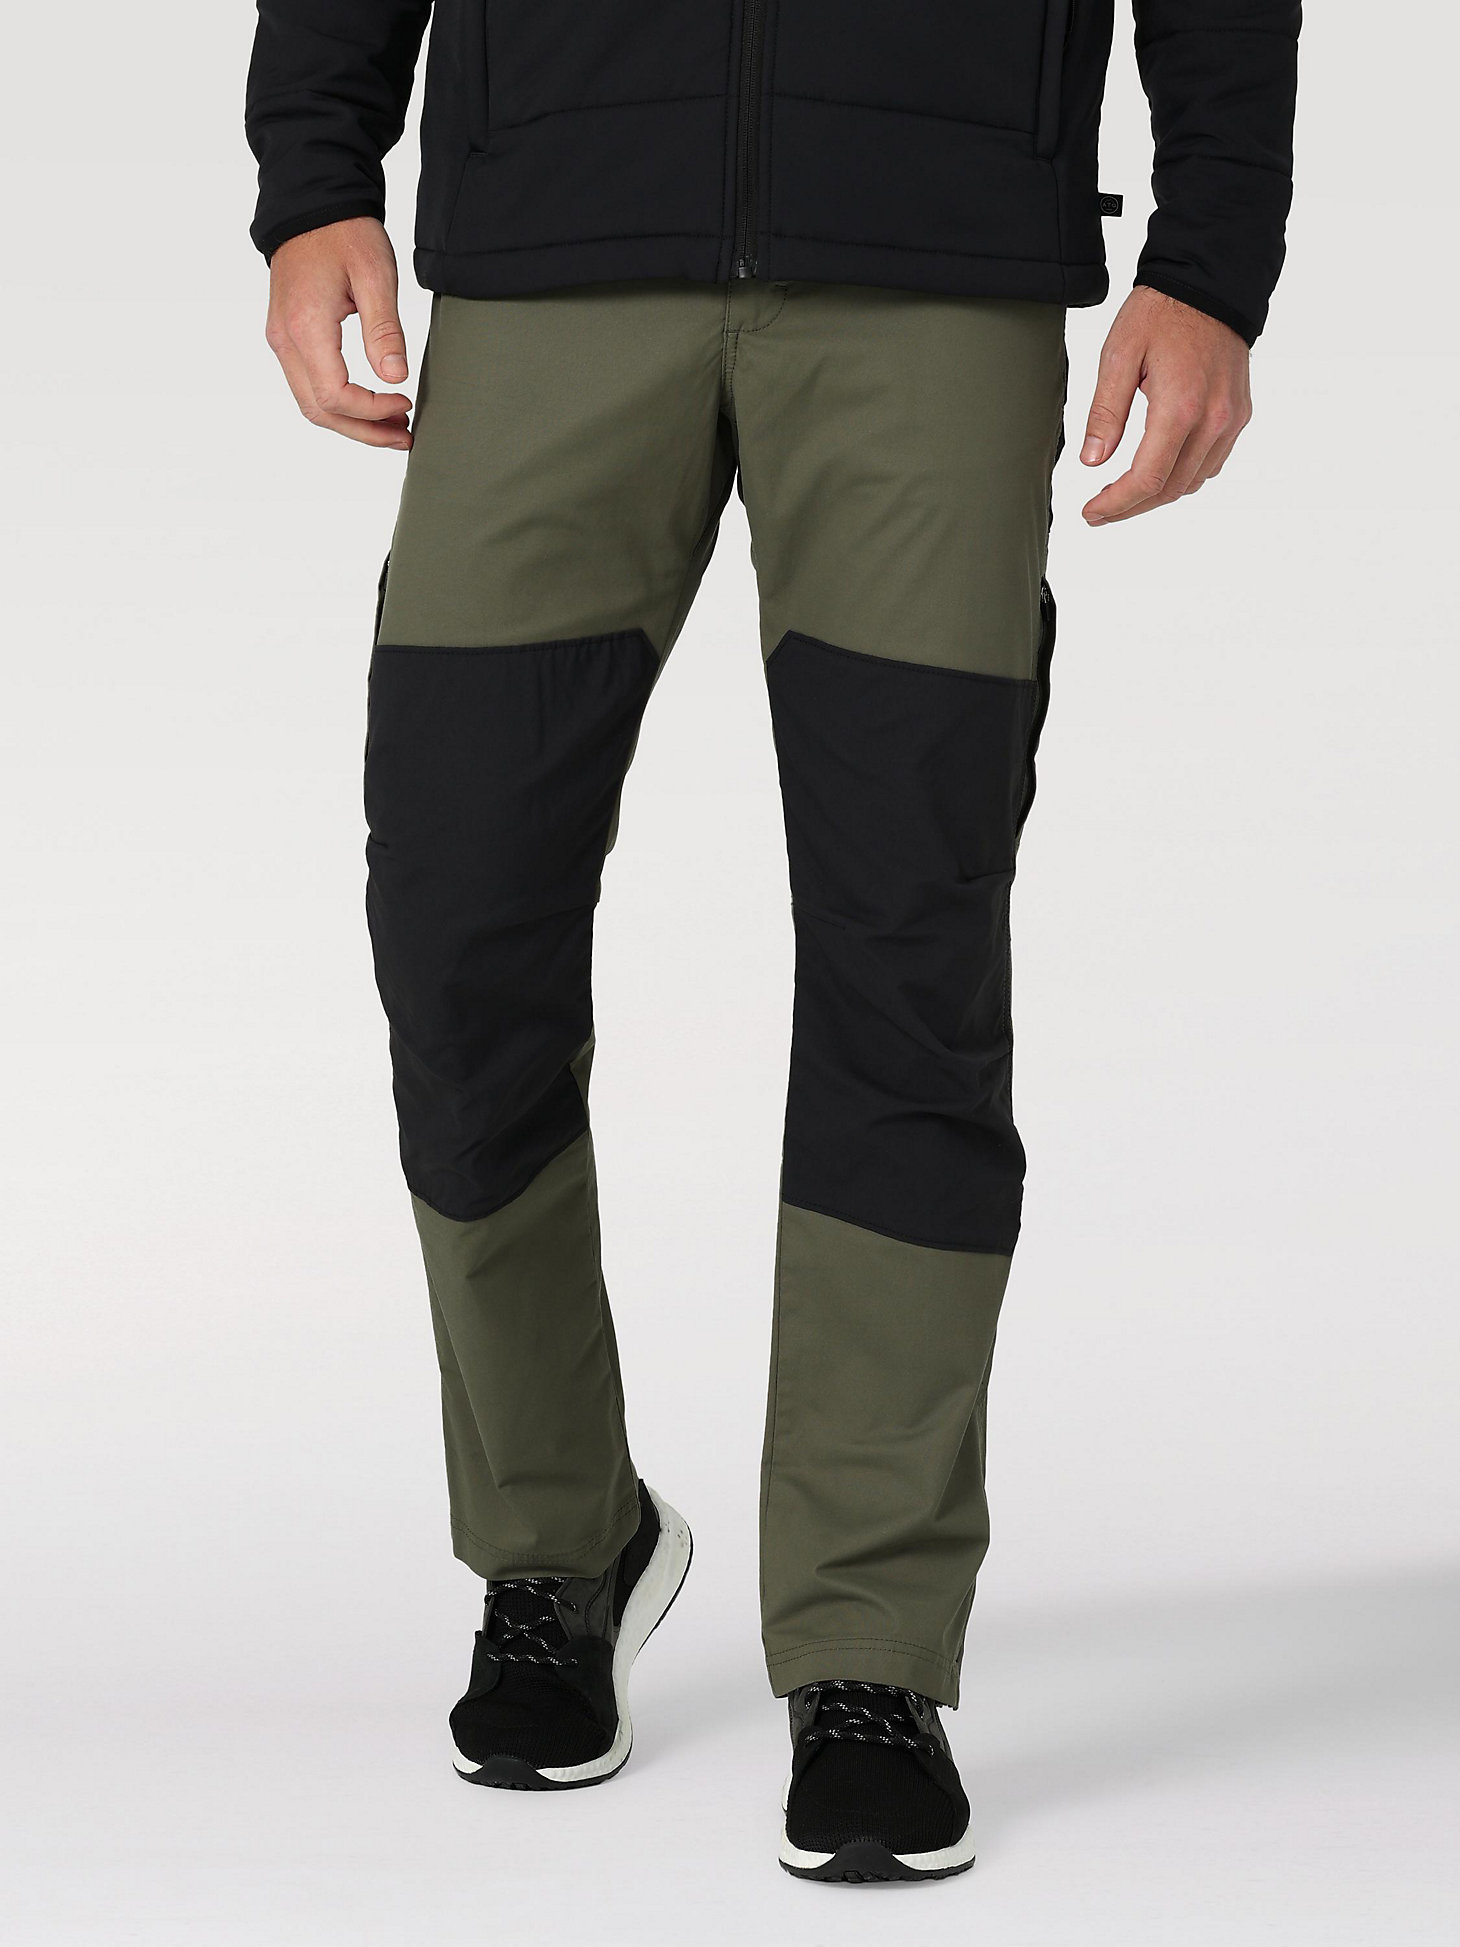 Reinforced Softshell Pant in Dusty Olive main view